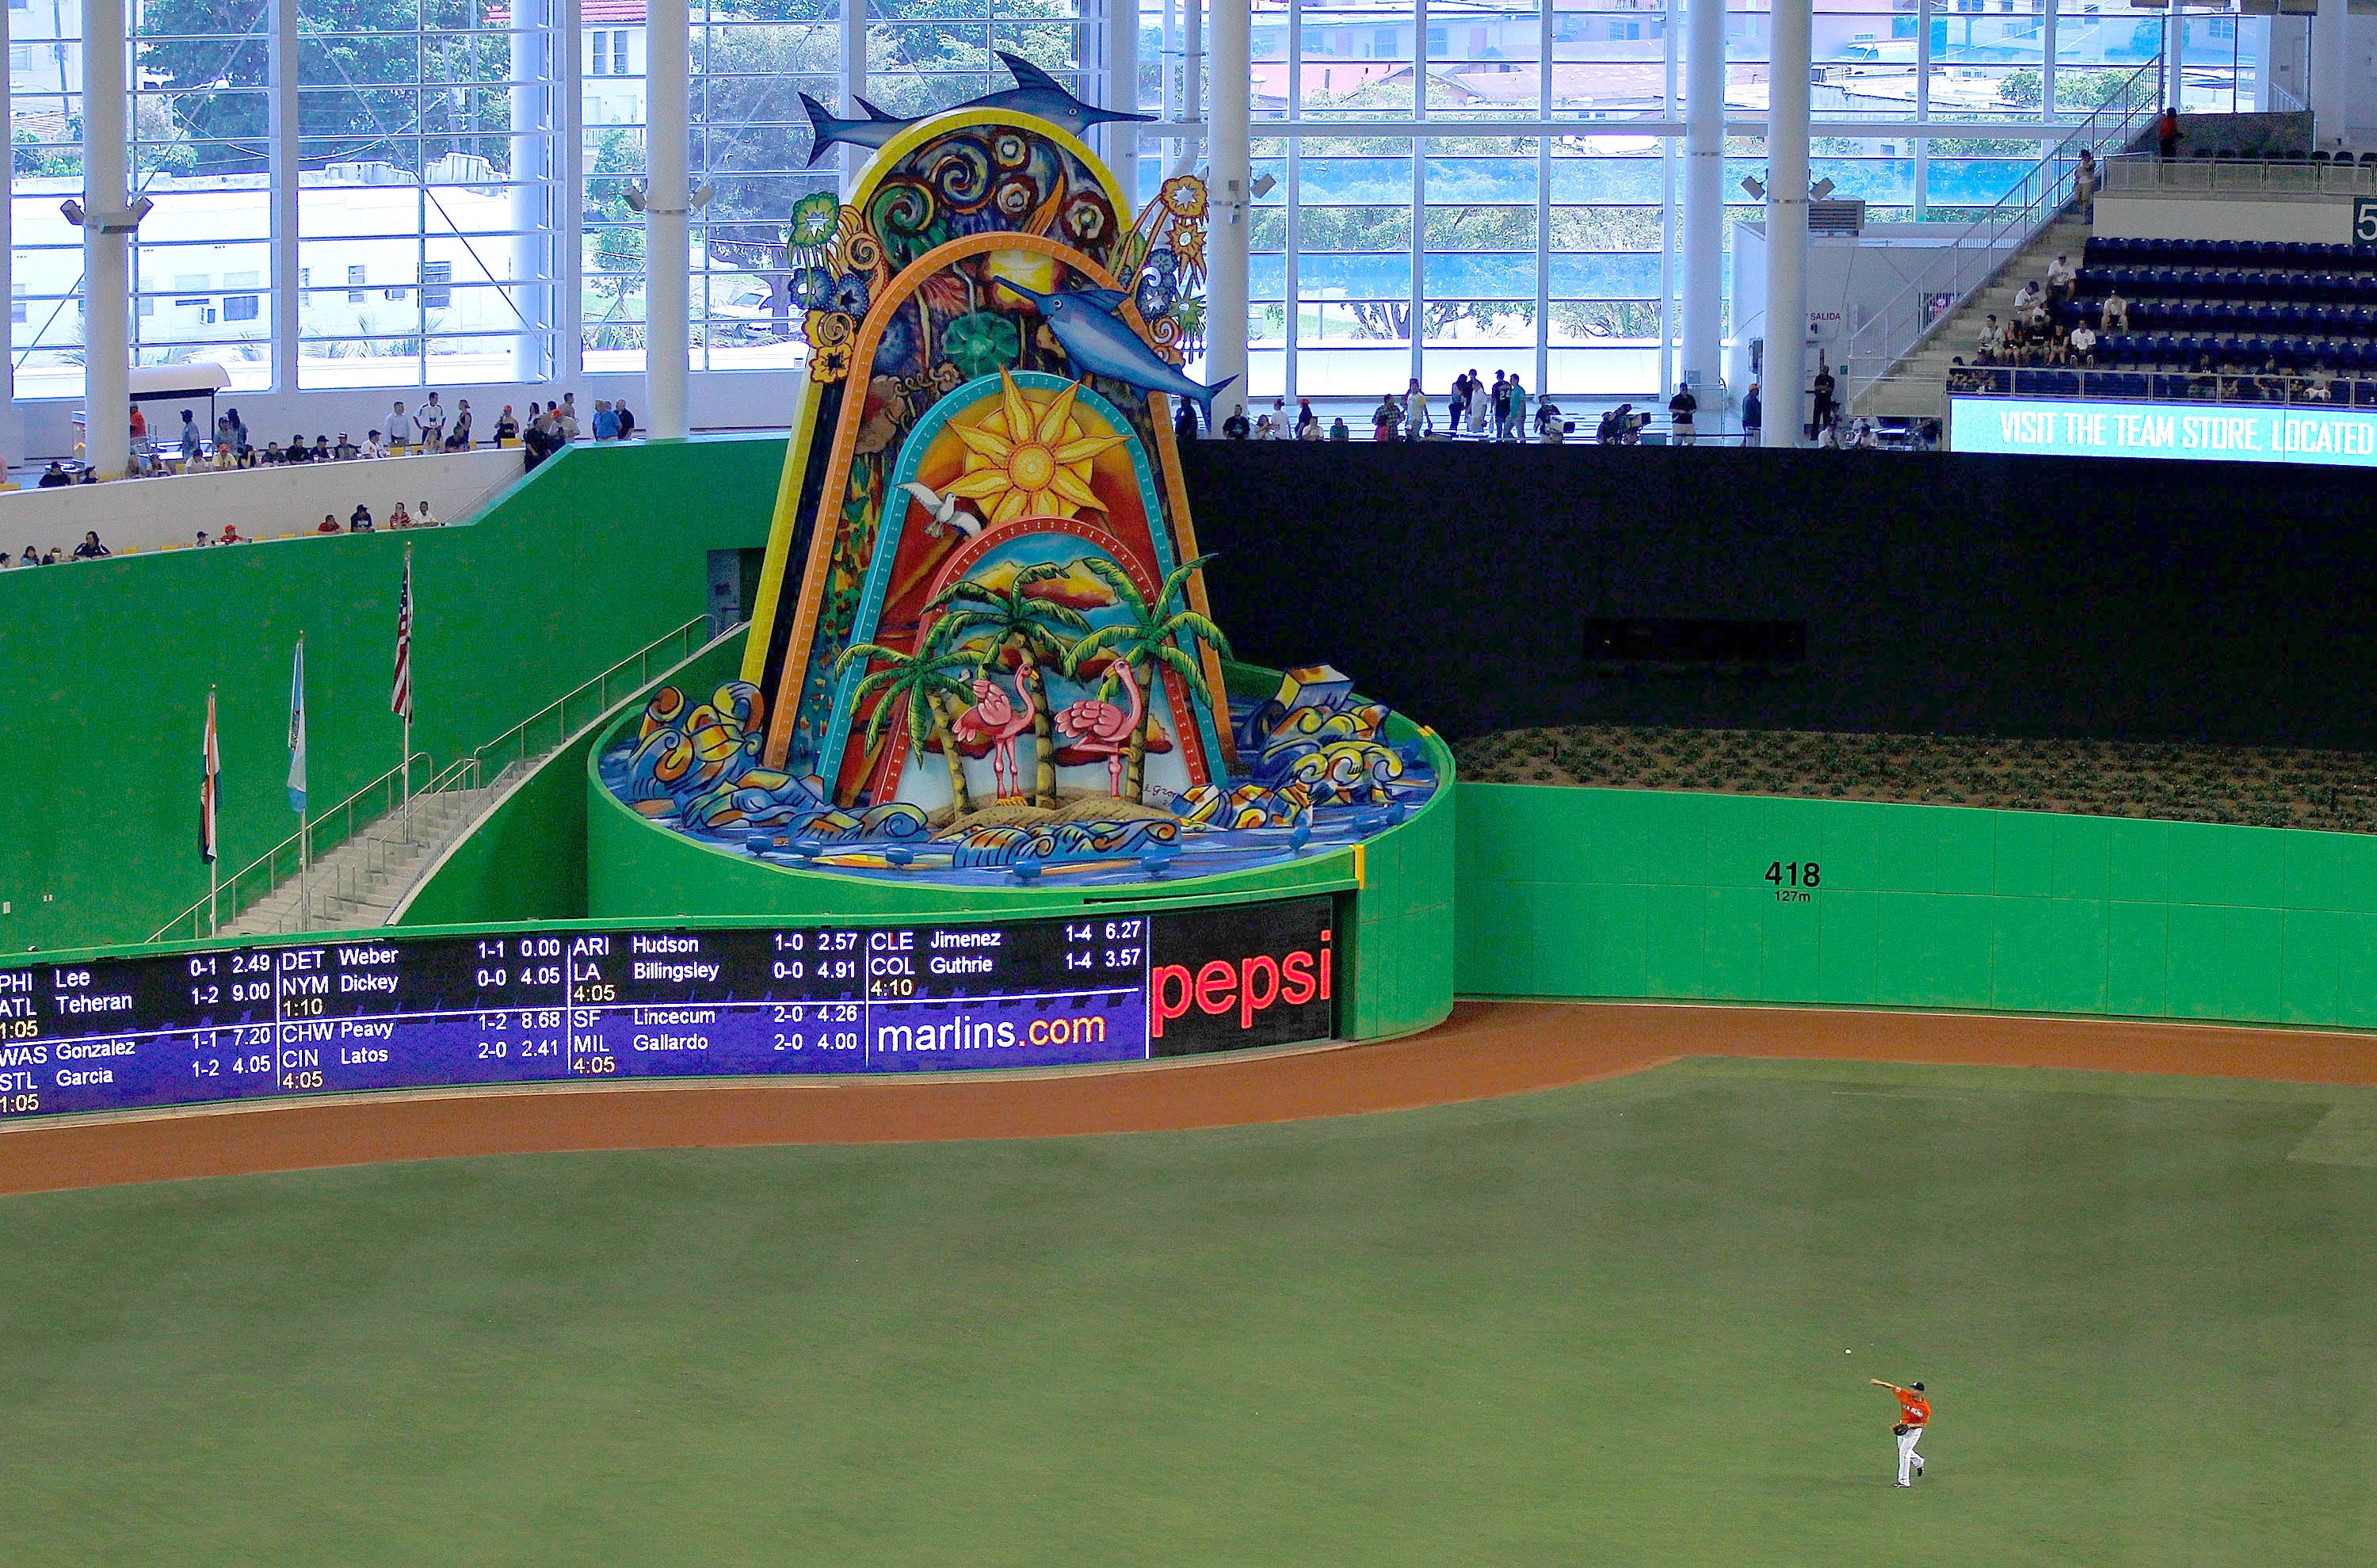 Sorry Jeter, Marlins HR sculpture &apos;not movable&apos;